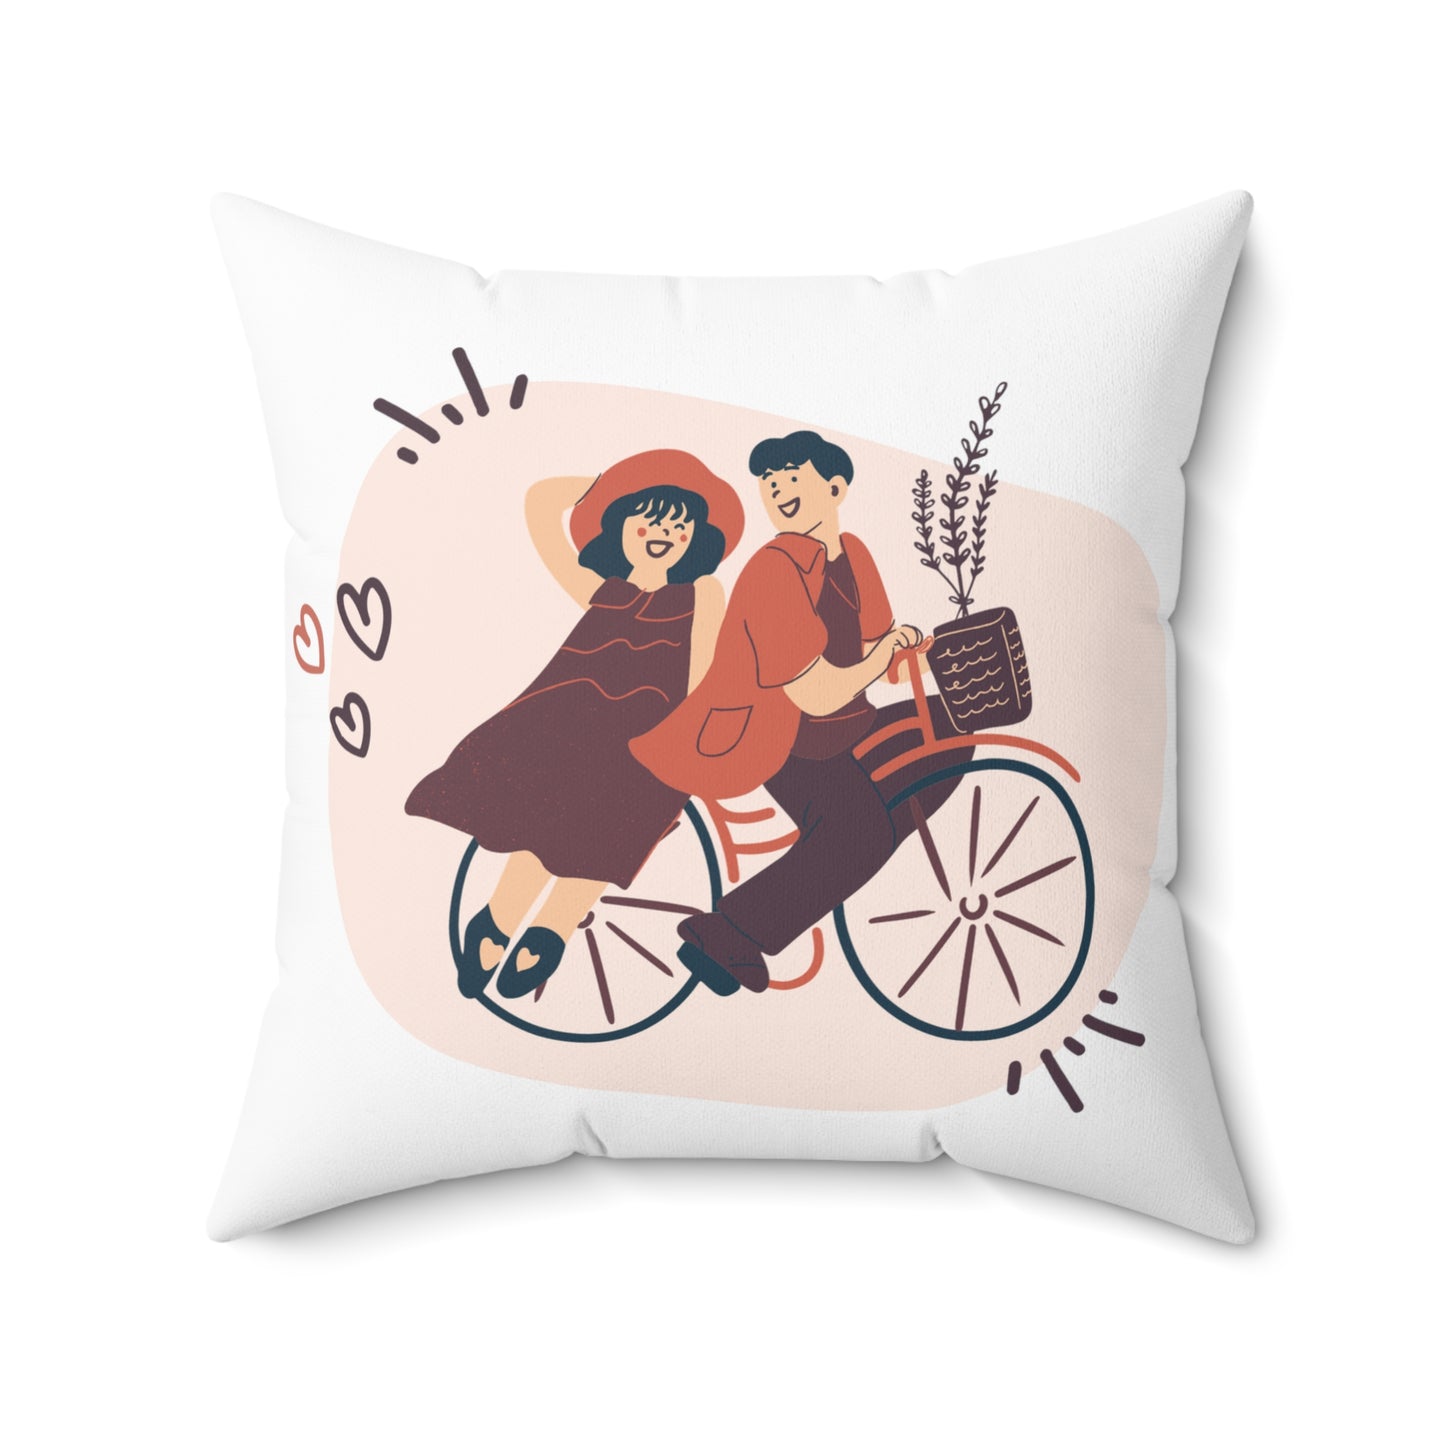 Couple on Cycle Printed Sqaure Pillow Case for Valentine